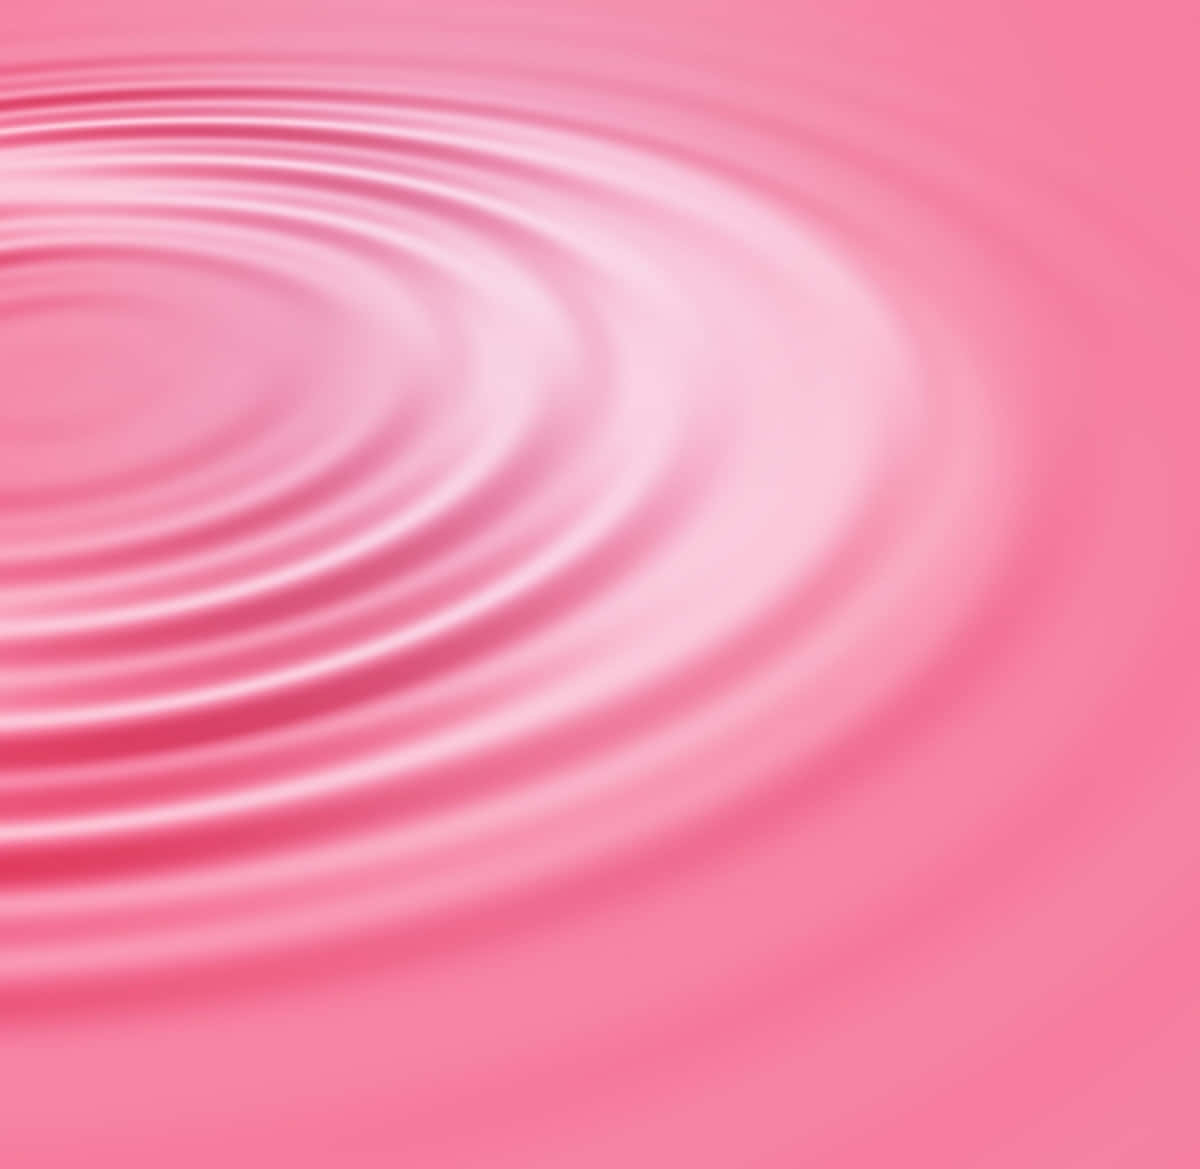 Download Brighten Up Your Day with This Colorful Pink Swirl